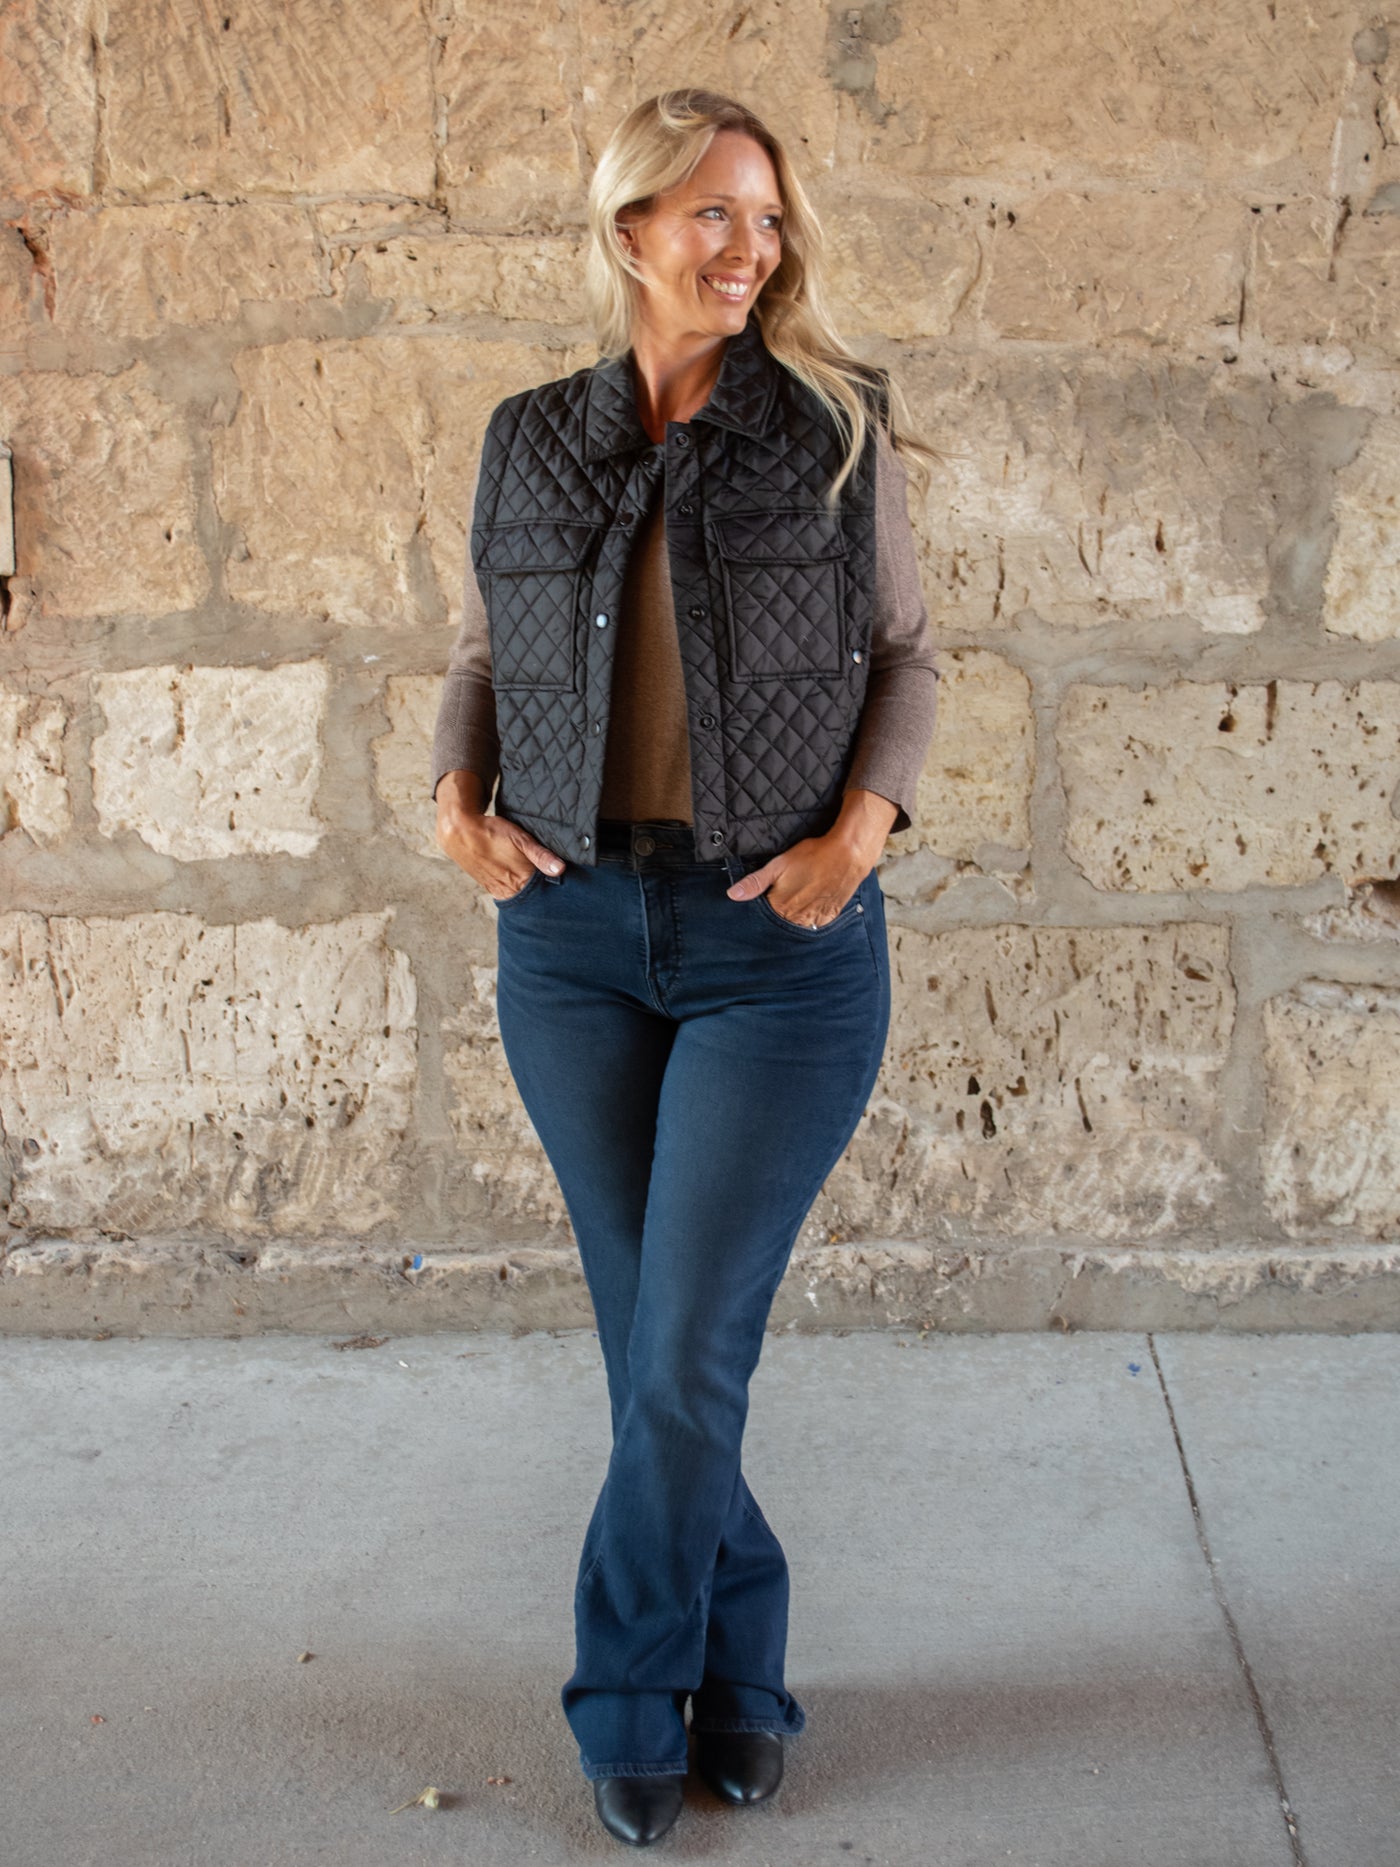 A model wearing a pair of dark wash bootcut jeans with a brown tee and a quilted black vest.